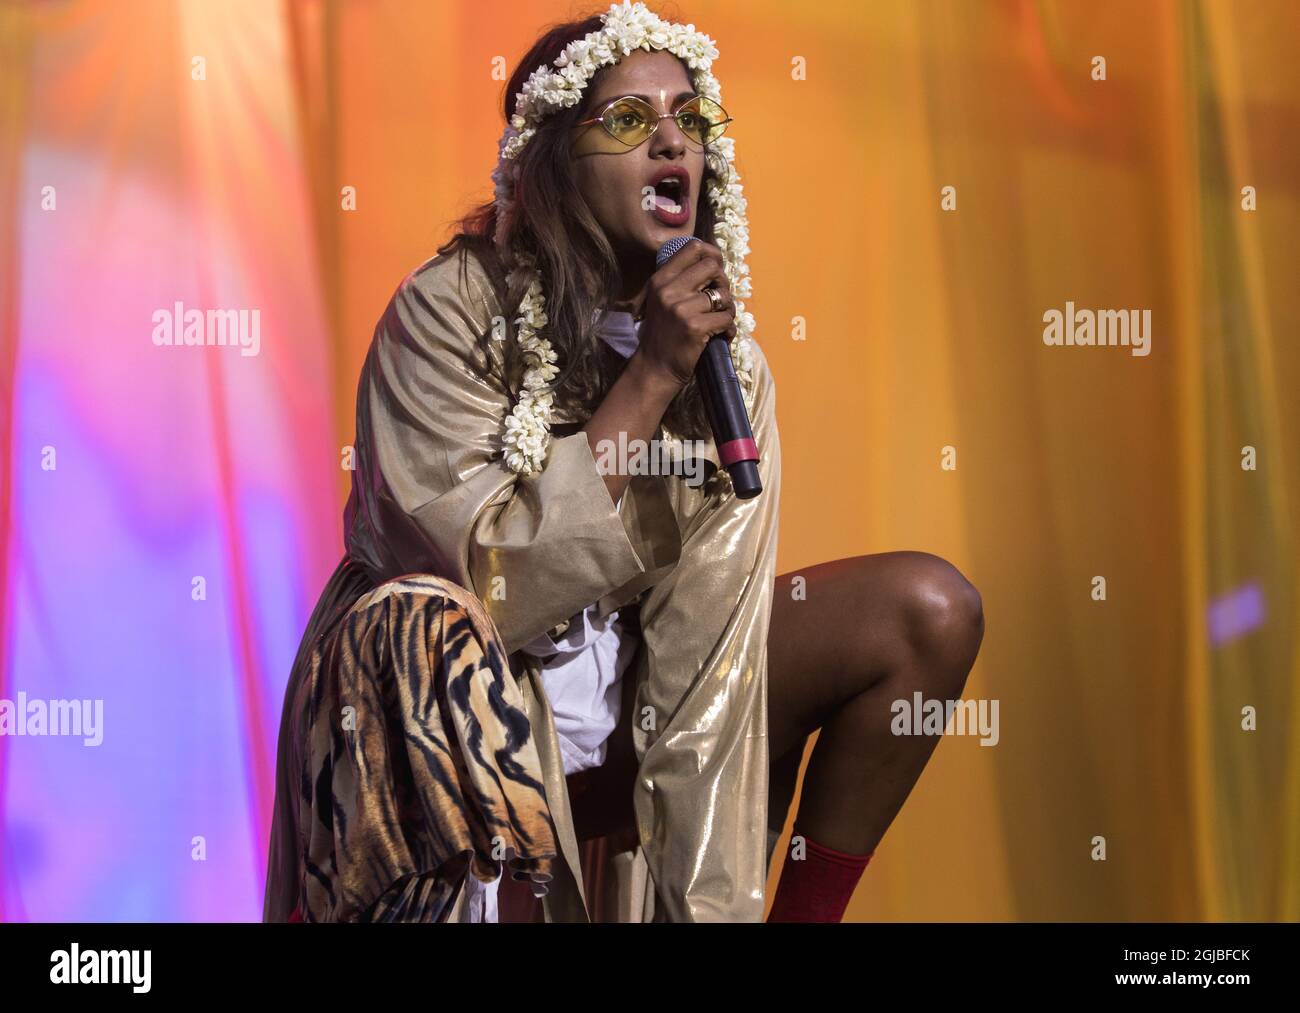 GOTEBORG 2018-08-10 British singer and rapper M.I.A. performs at musicfestival Way Out West in Gothenburg, Sweden August 10, 2018. Photo Thomas Johansson / TT / Kod 9200  Stock Photo